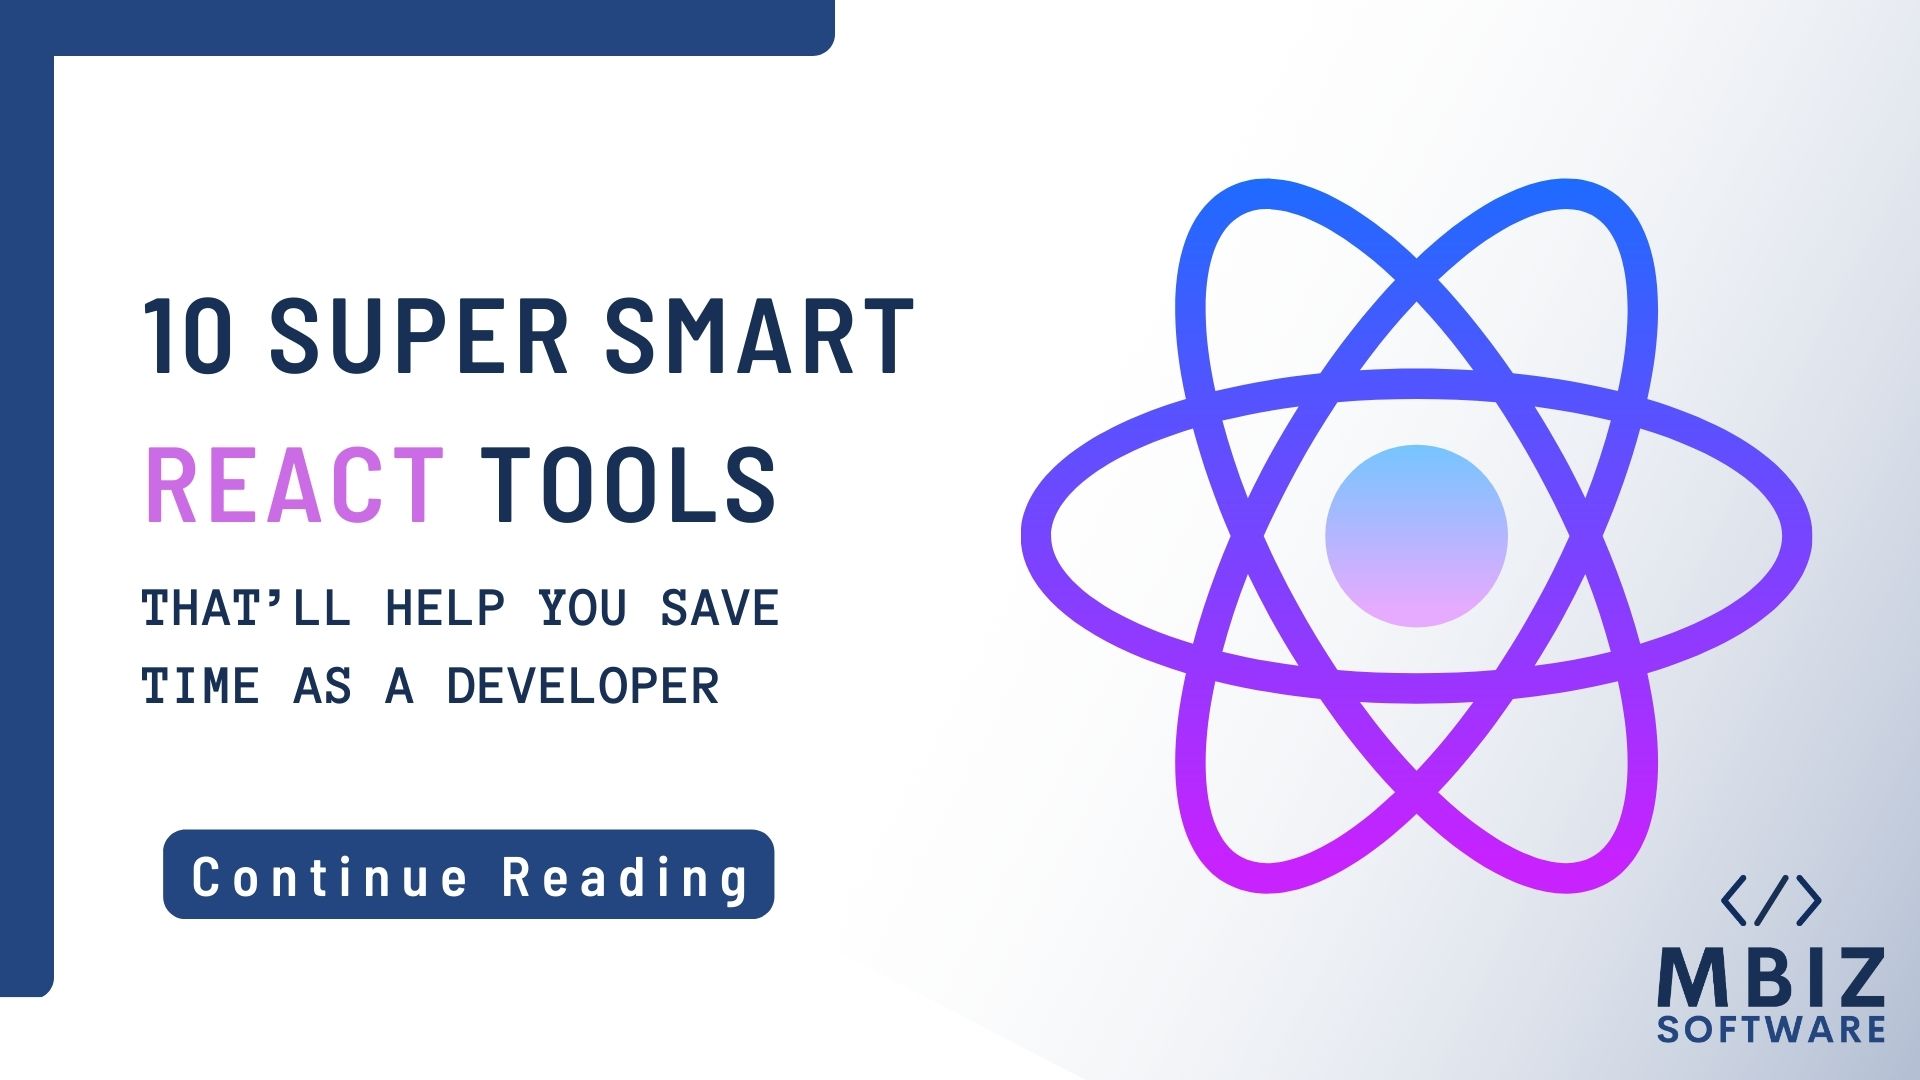 10 Super Smart React Tools That'll Help You Save Time As A Developer. MBiz Software, your it managed services partner.